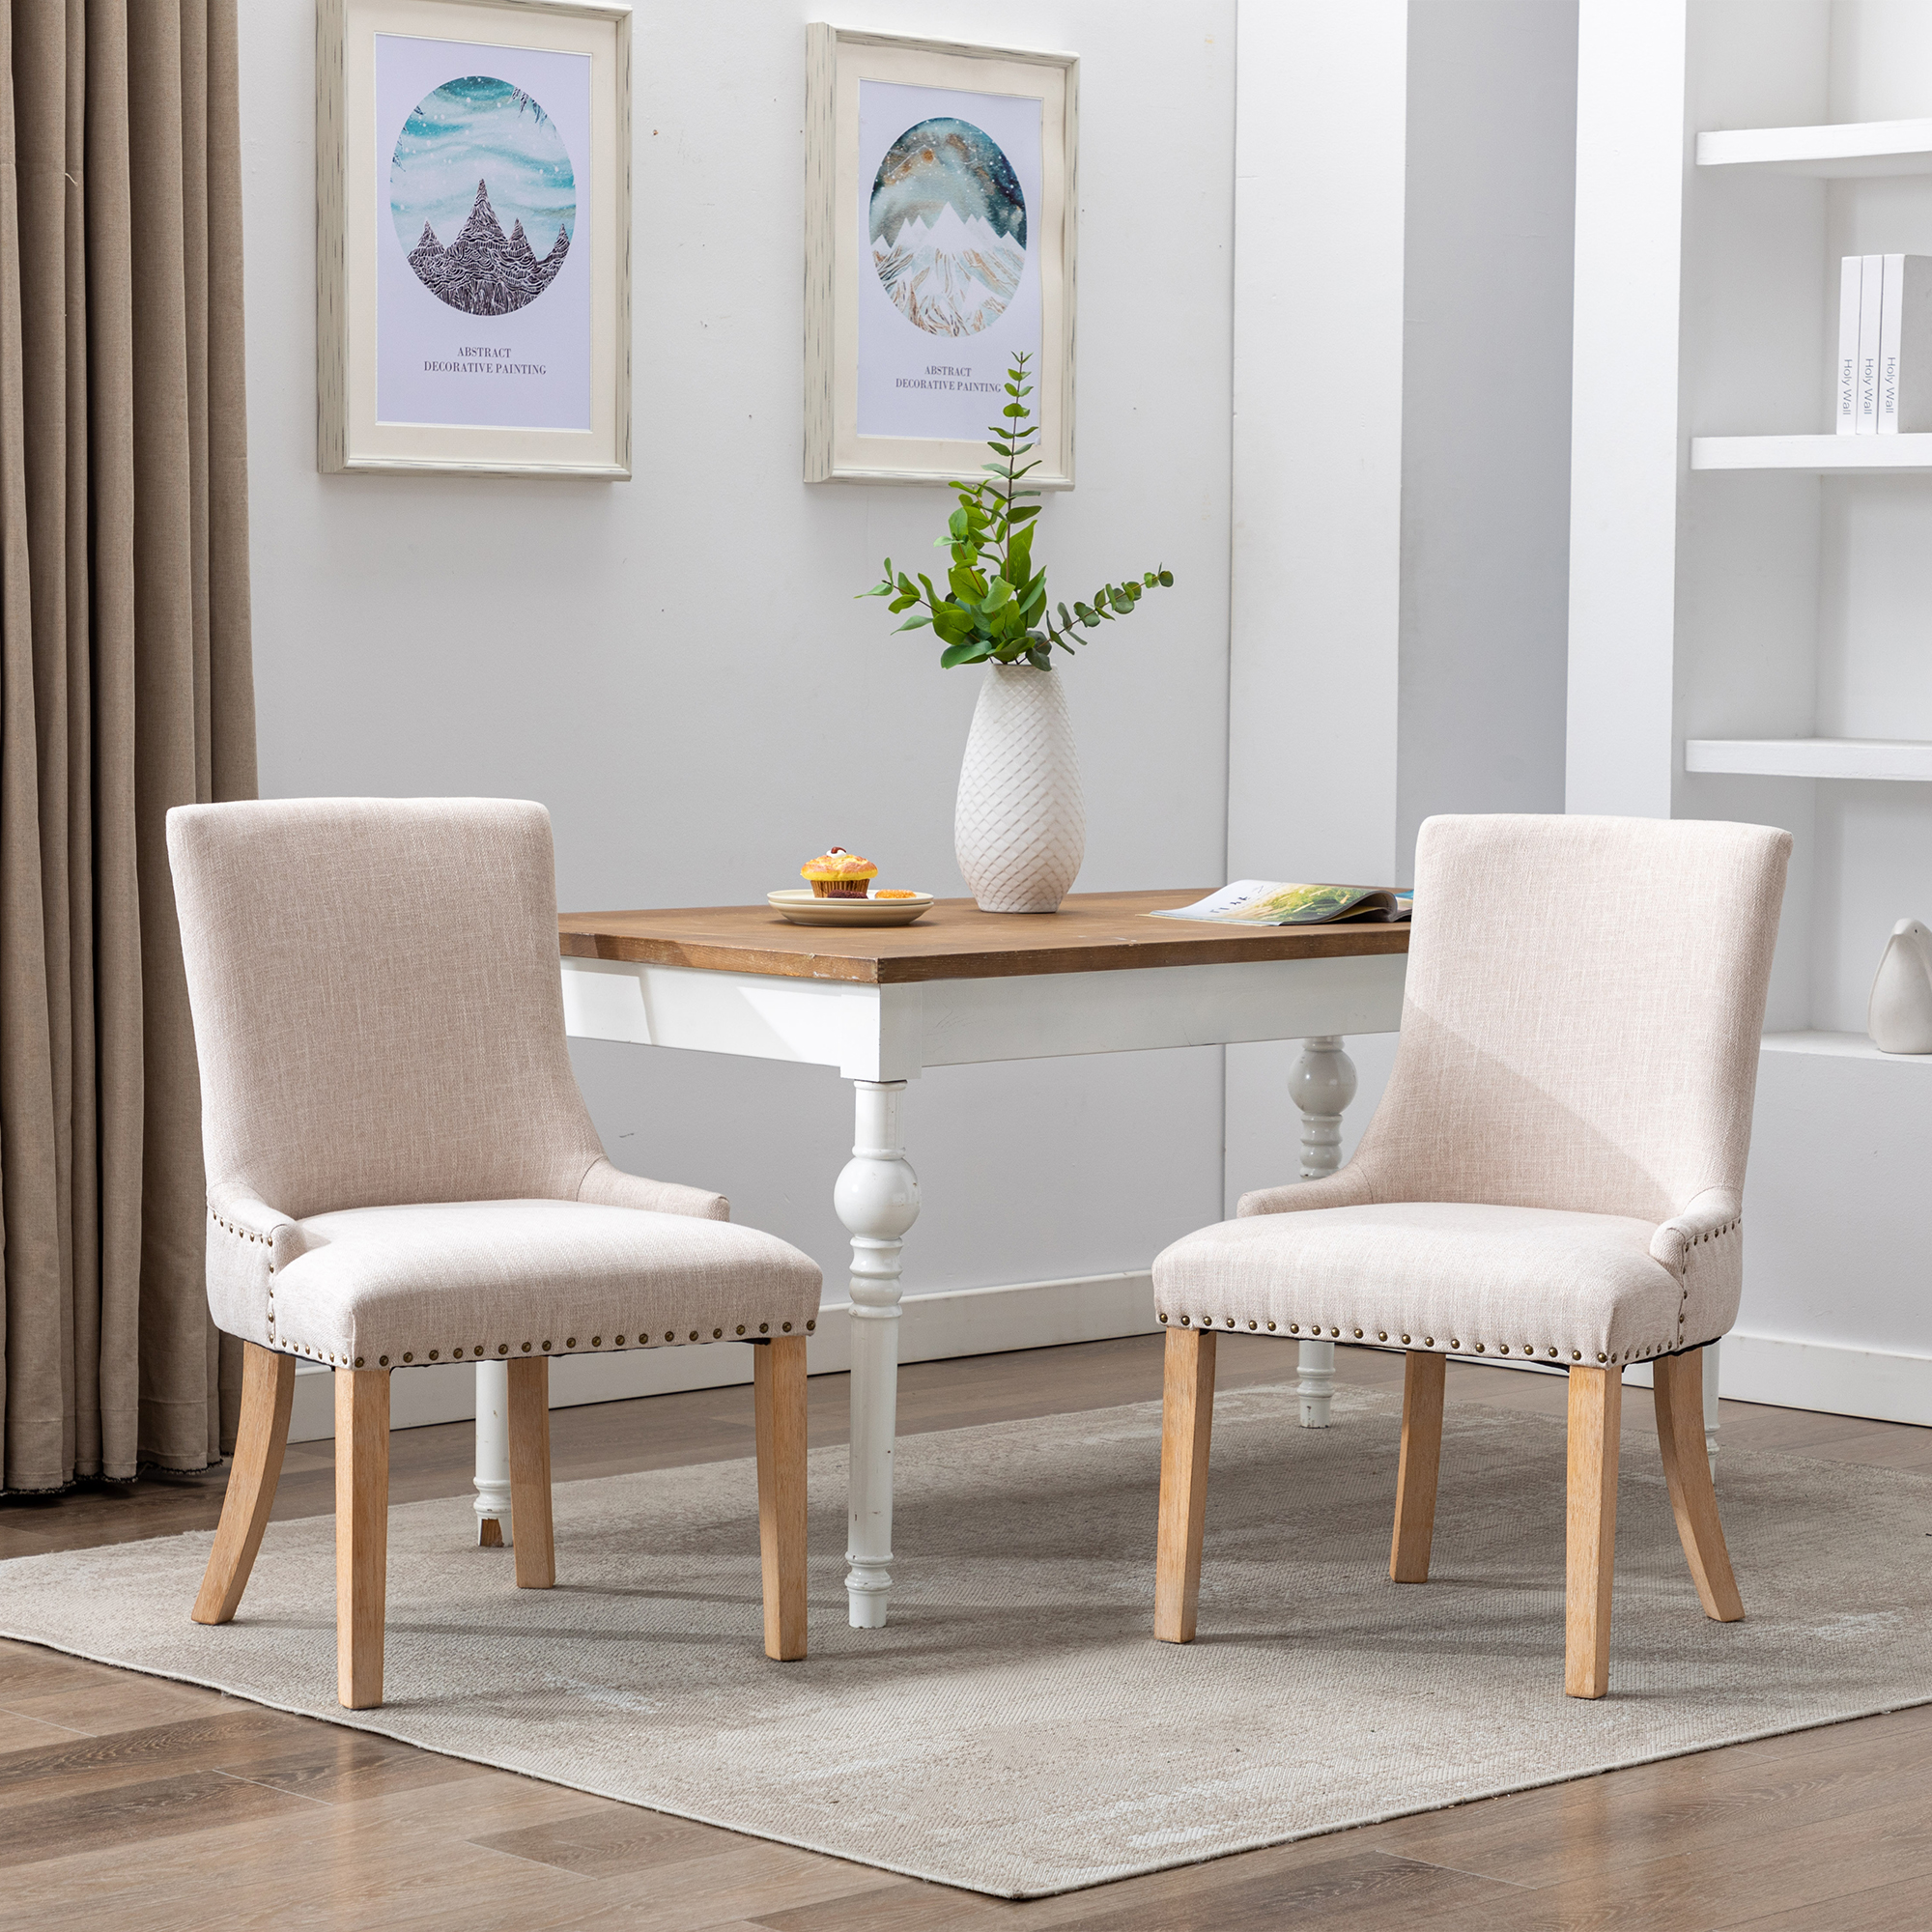 Hengming  Set of 2 Fabric Dining Chairs Leisure Padded Chairs with  Rubber Wood Legs,Nailed Trim, Beige-Boyel Living